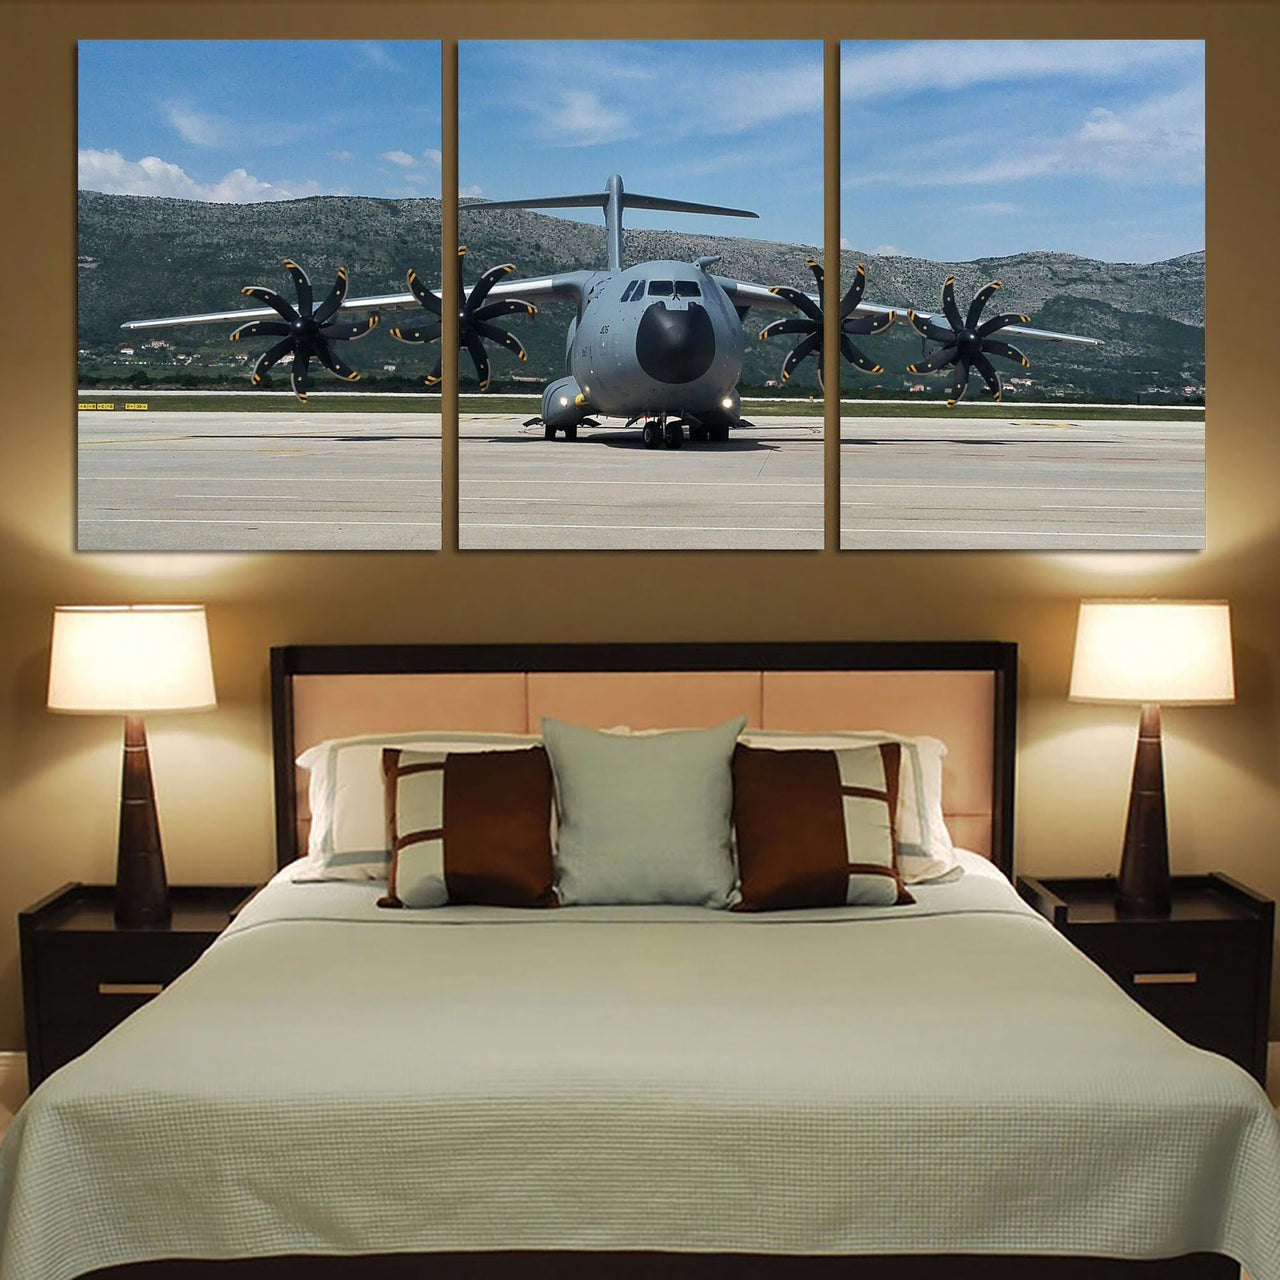 Face to Face with Airbus A400M Printed Canvas Posters (3 Pieces) Aviation Shop 